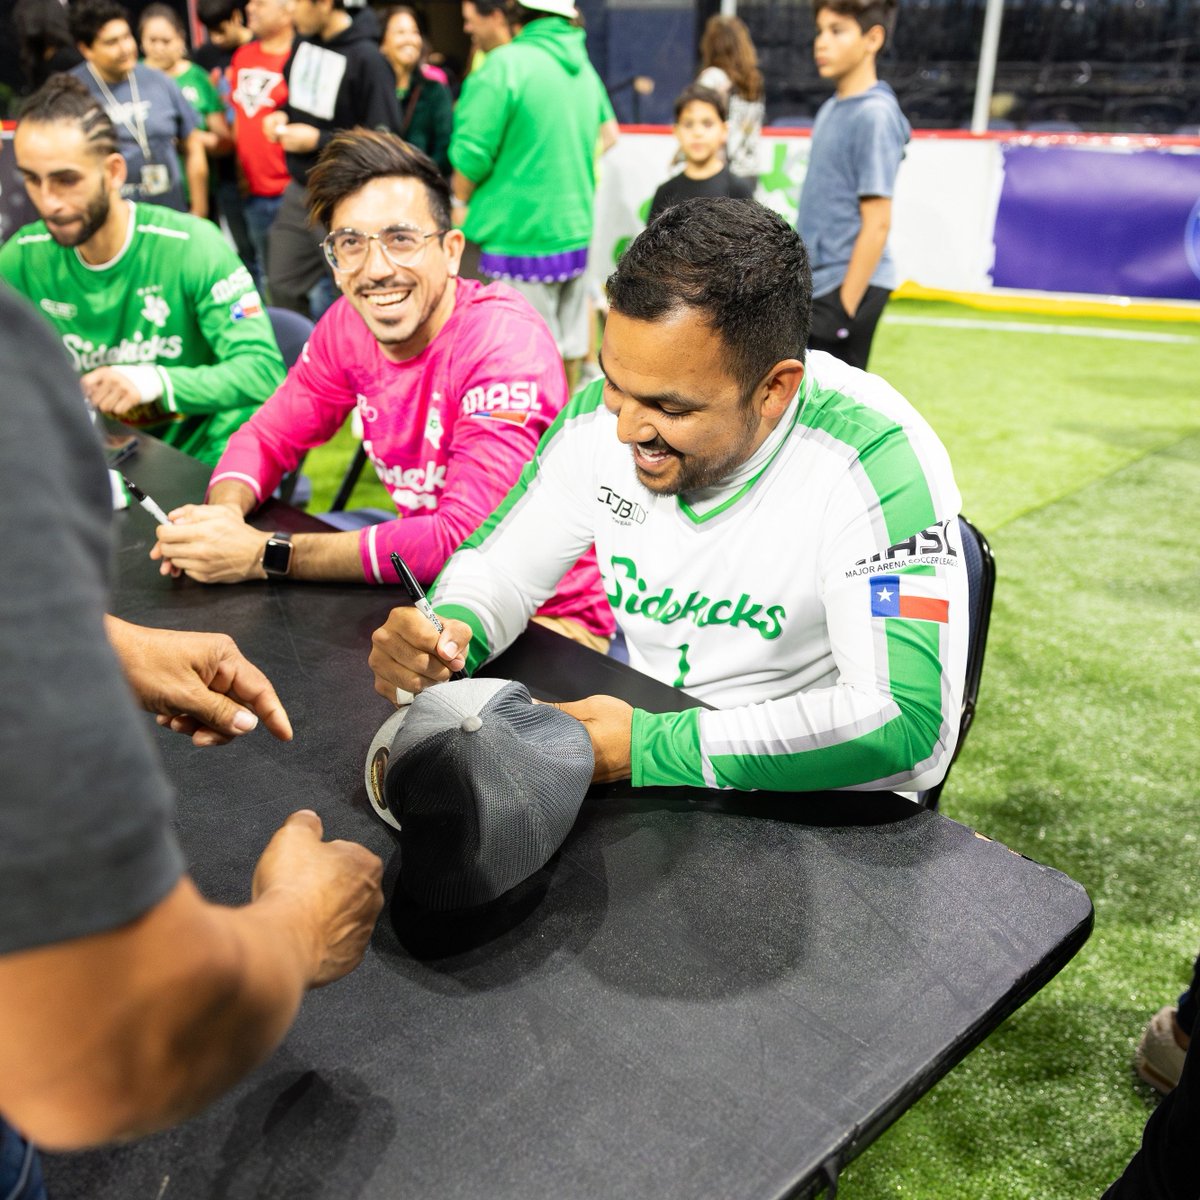 One of our favorite parts of game day is meeting the fans after the game 💚 Happy Fan Friday, Sidekicks Nation! #FanFriday | #SidekicksRising